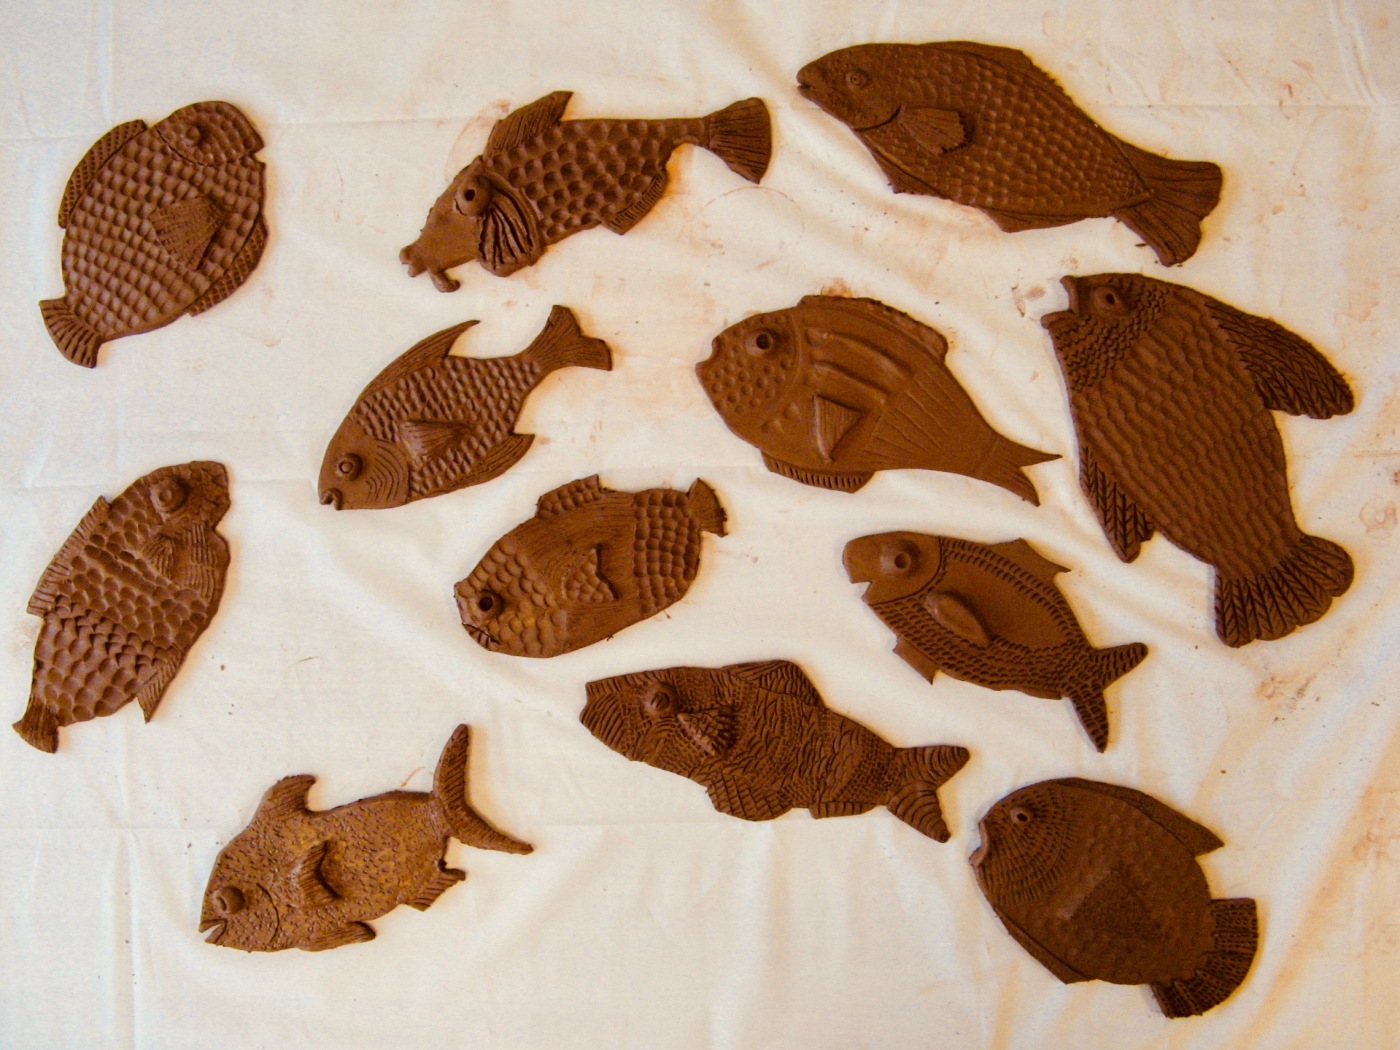 Handmade clay fish made during the Island Project workshop